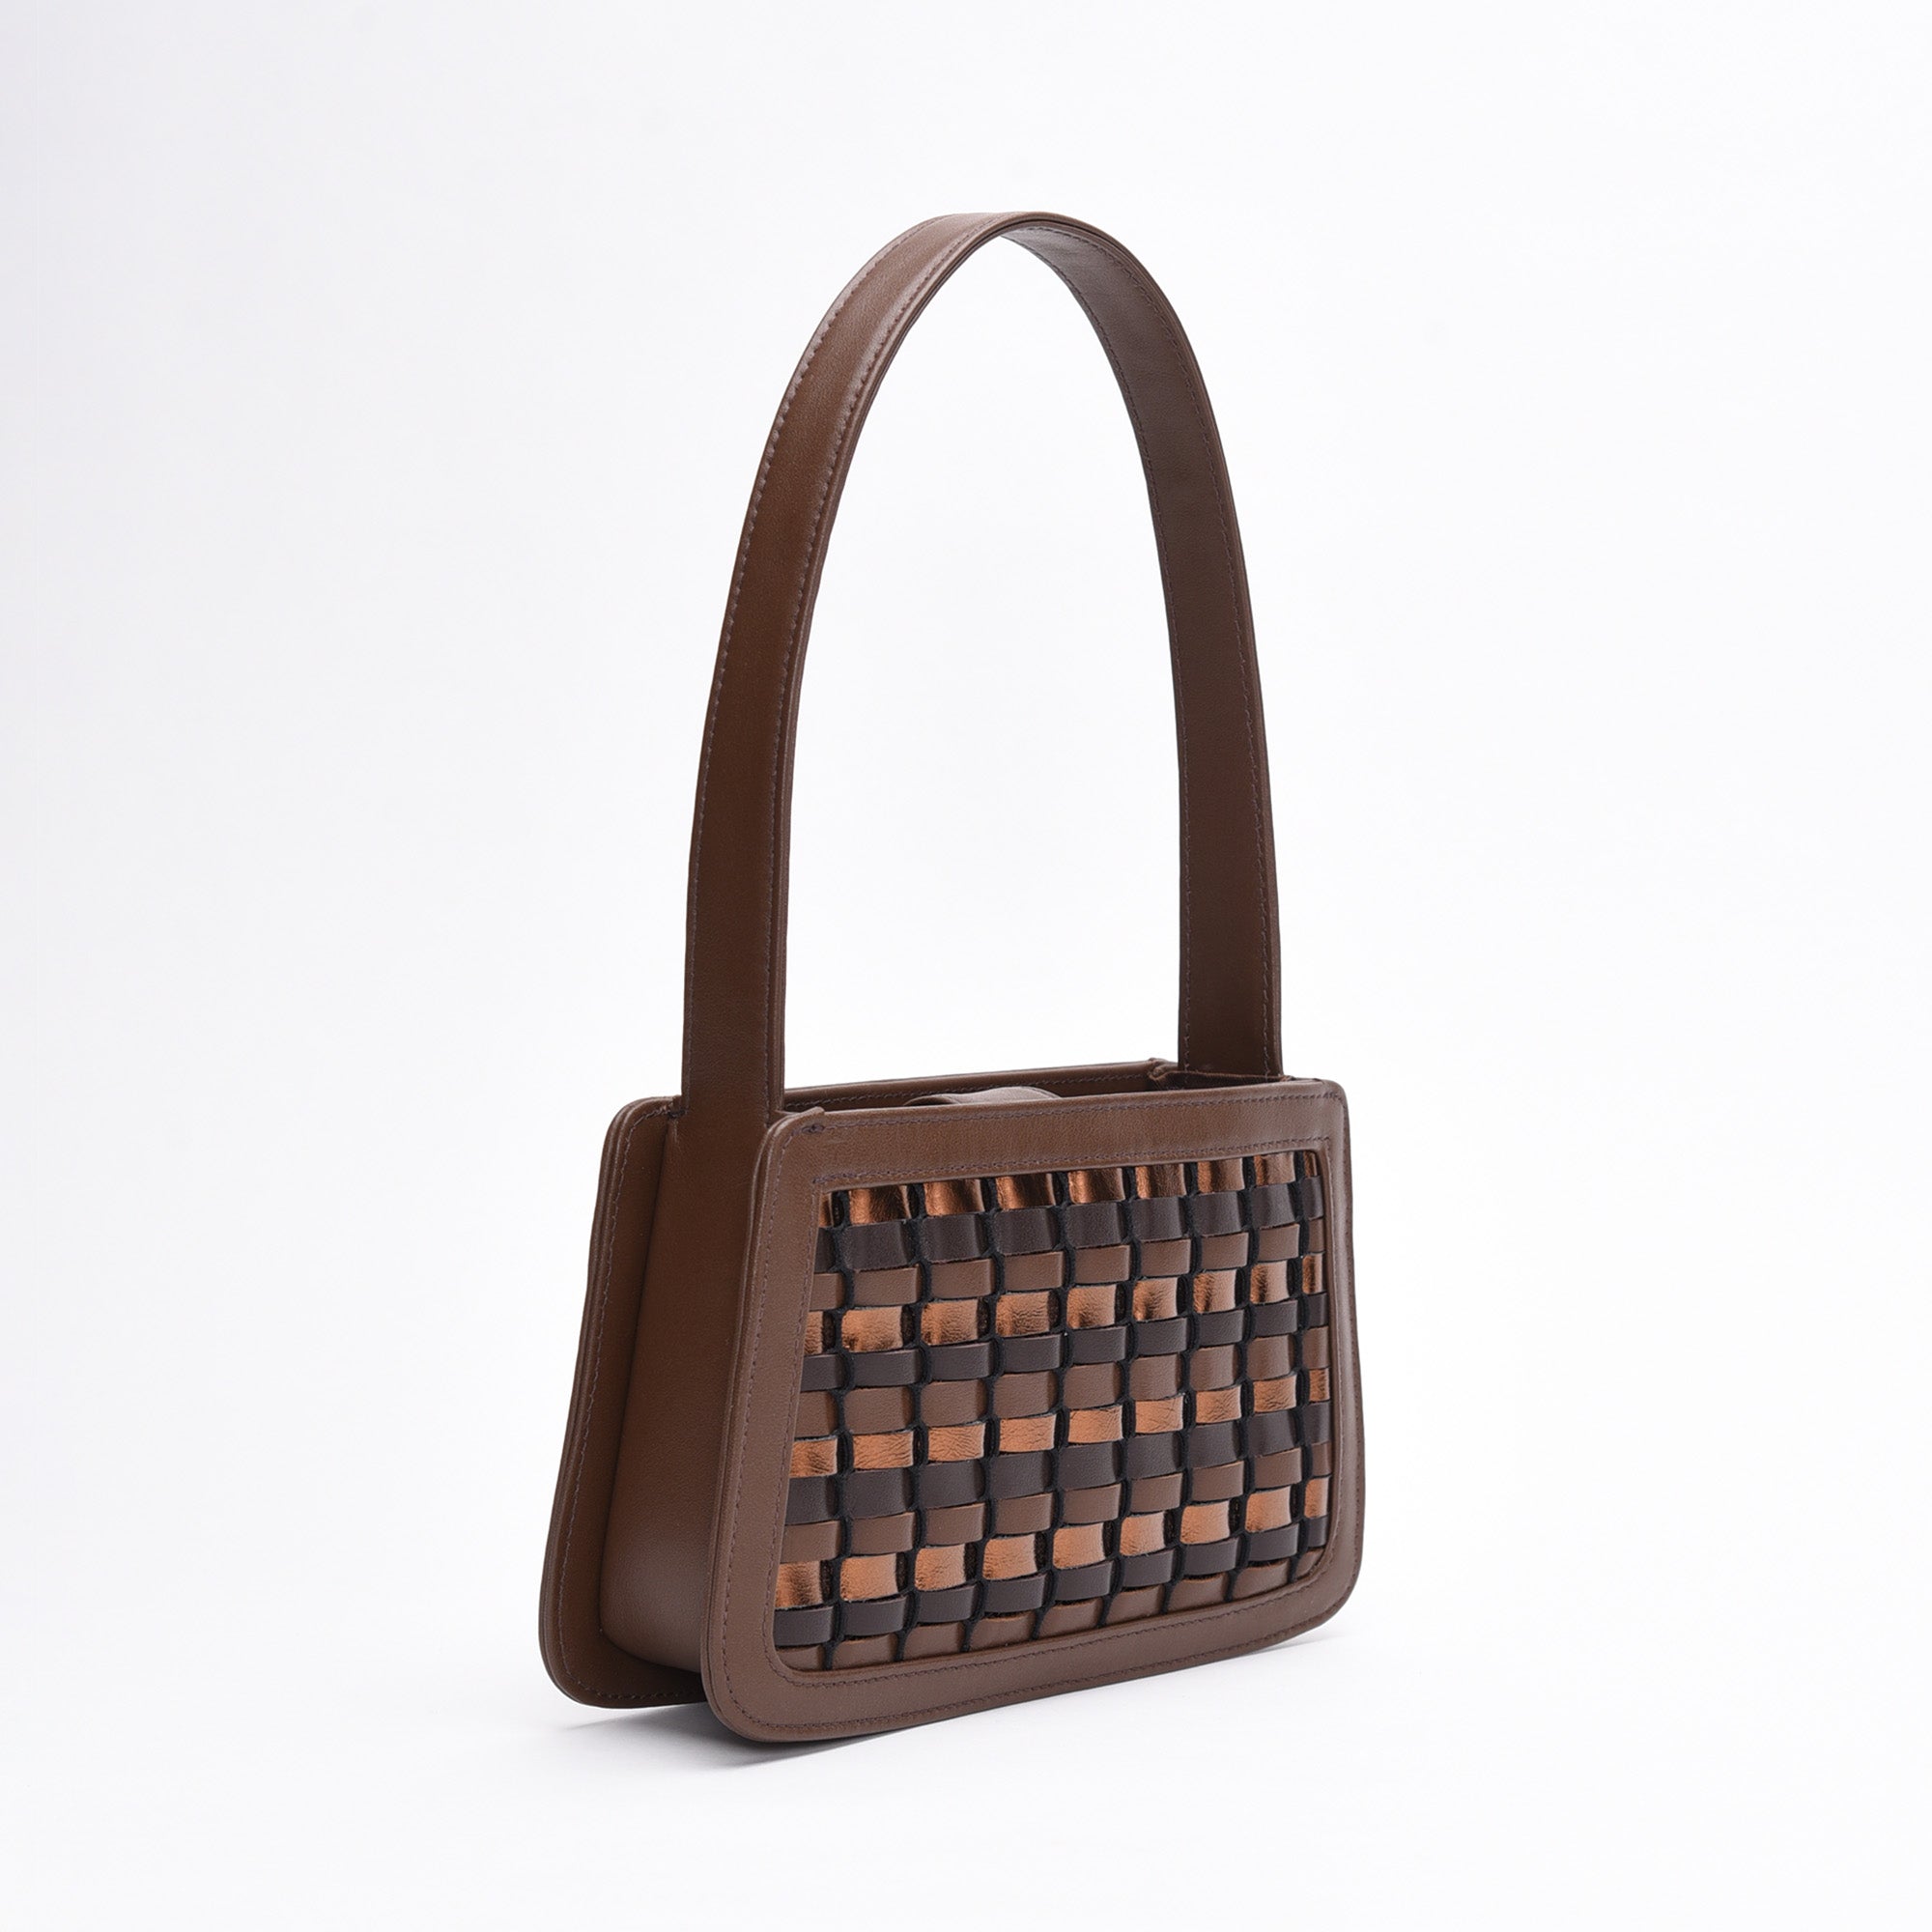 picture of made in USA Luxury Leather Handbag hand-woven with multiple leathers in various chocolate brown, matte brown, and metallic colorway